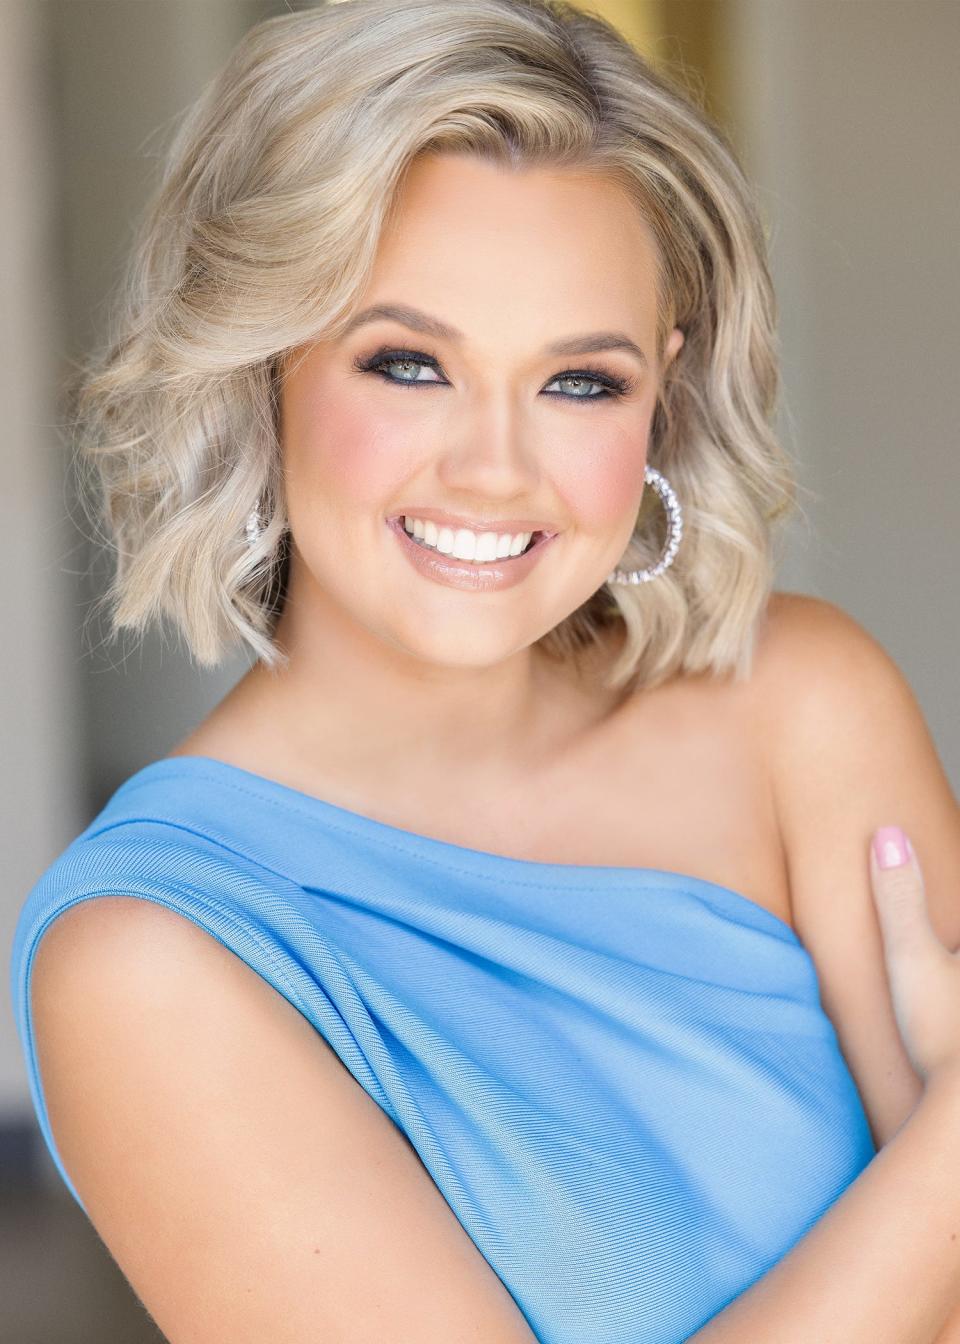 Maya Schuhknecht was crowned the new Miss Michigan on June 17, 2023.